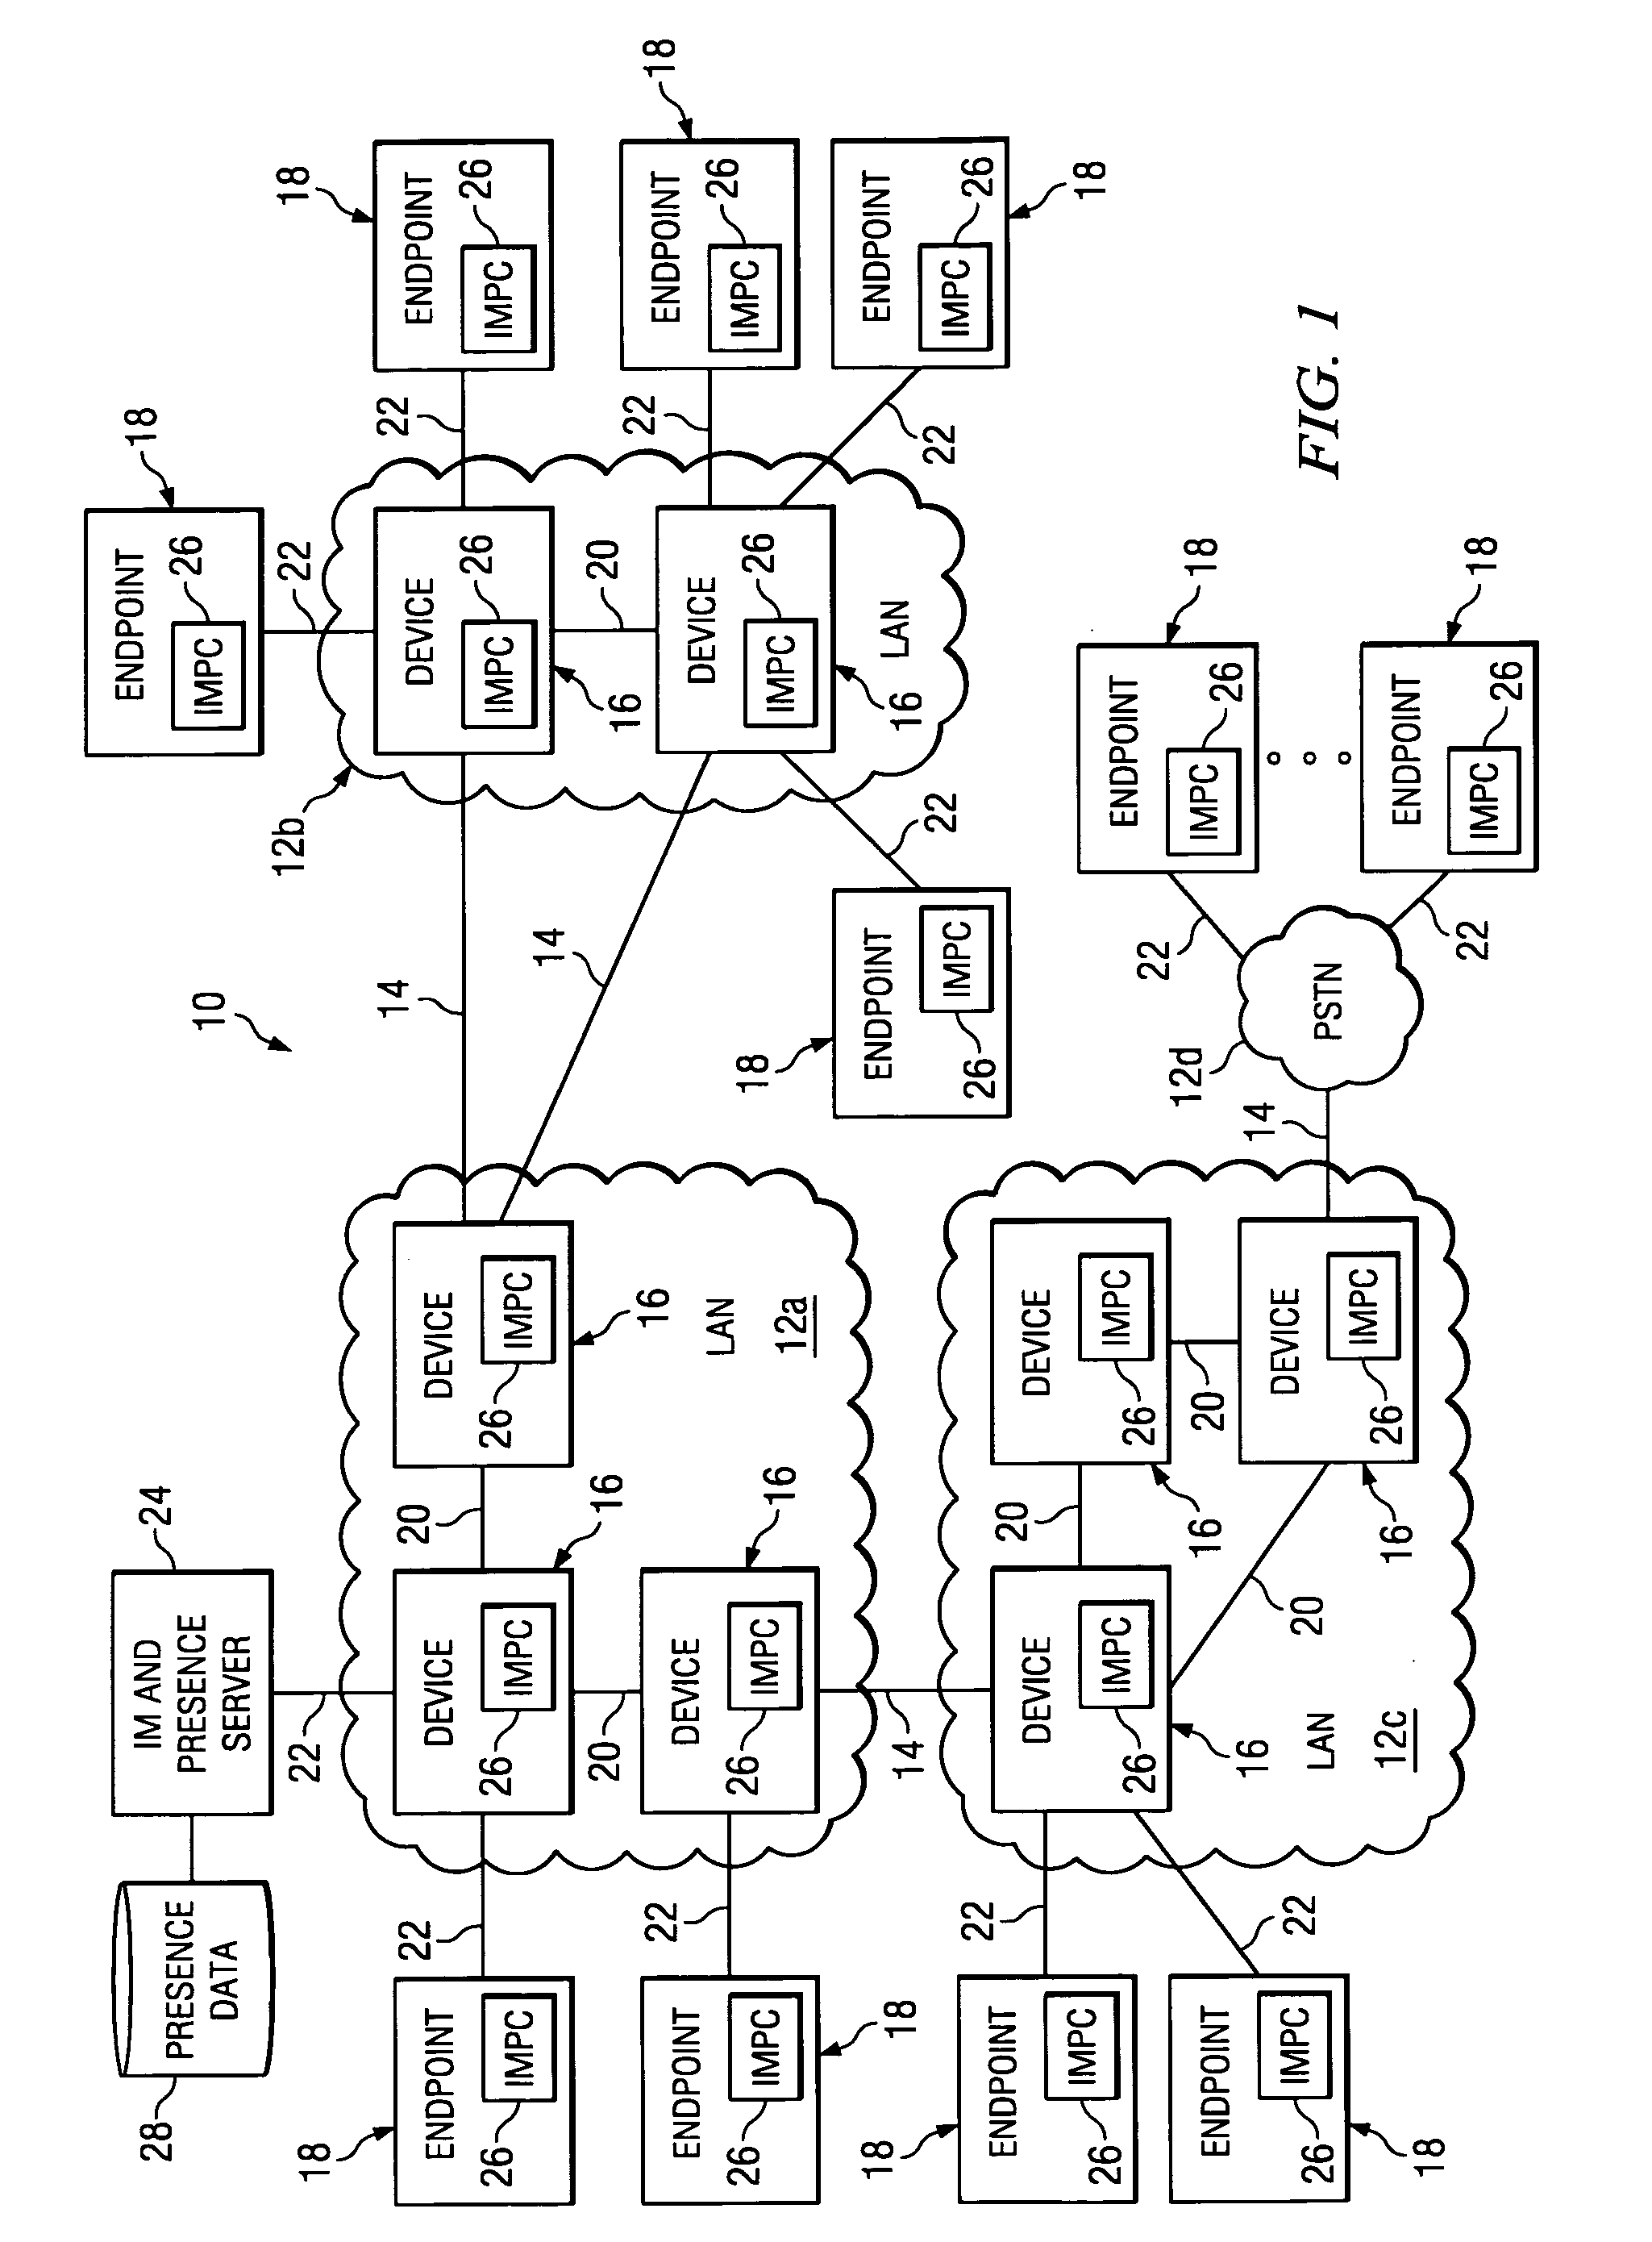 Presence-based management in a communication network